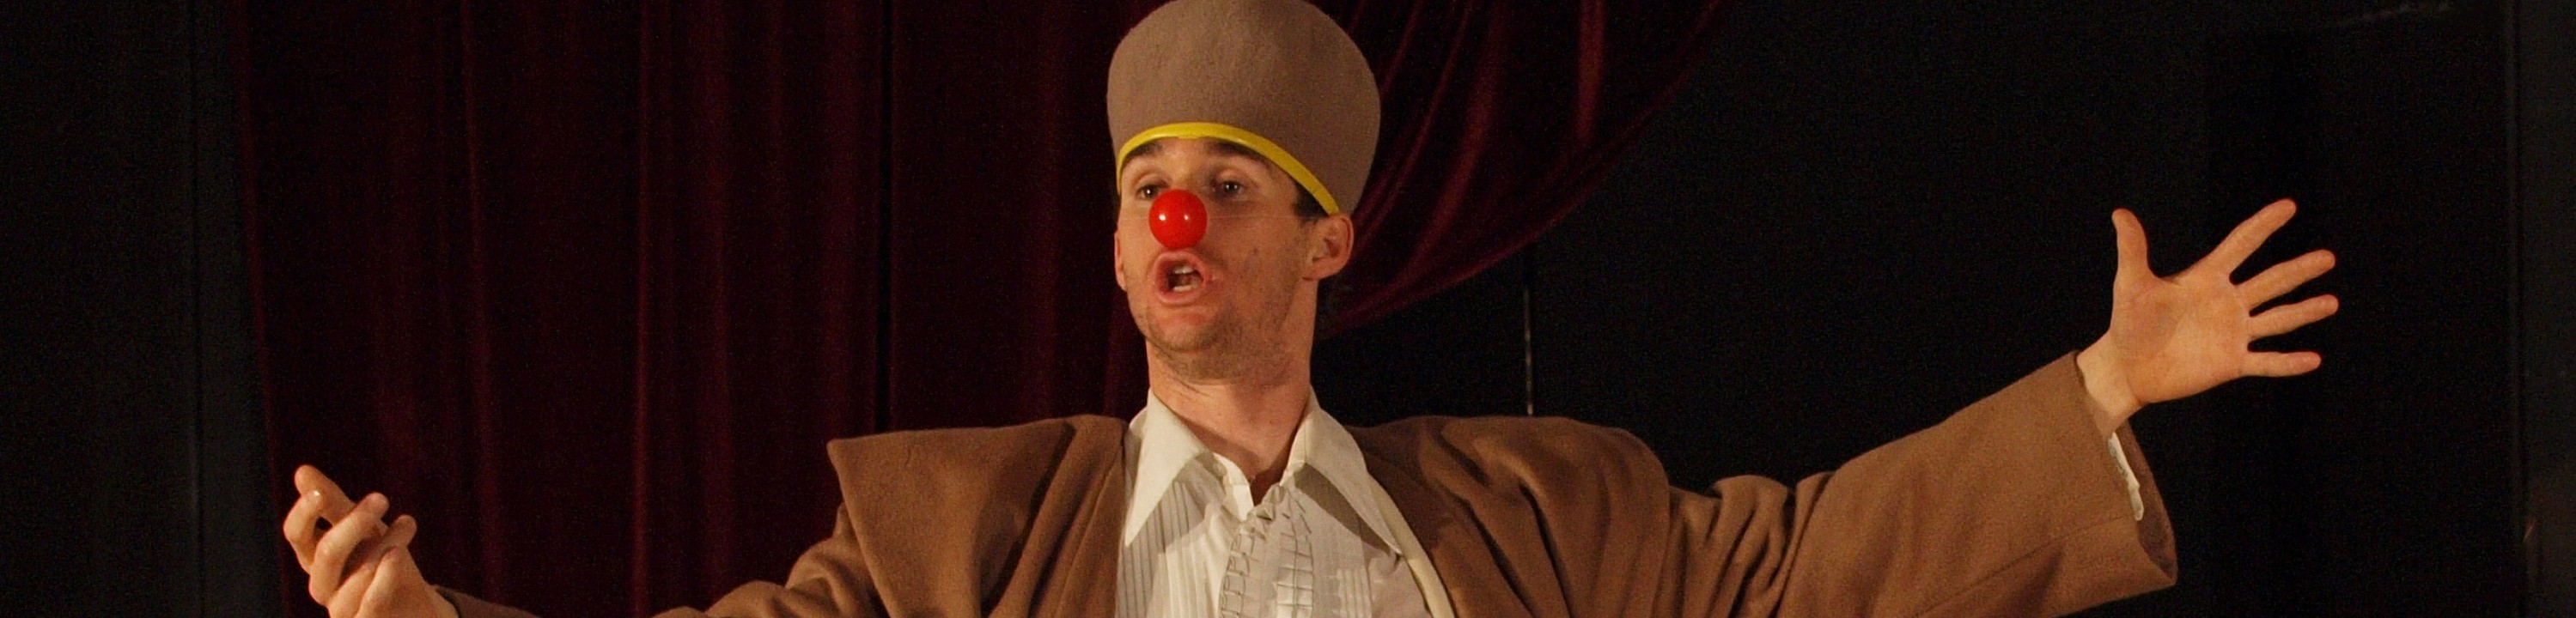 a clown with a red nose gesturing on stage - image credit Helikos